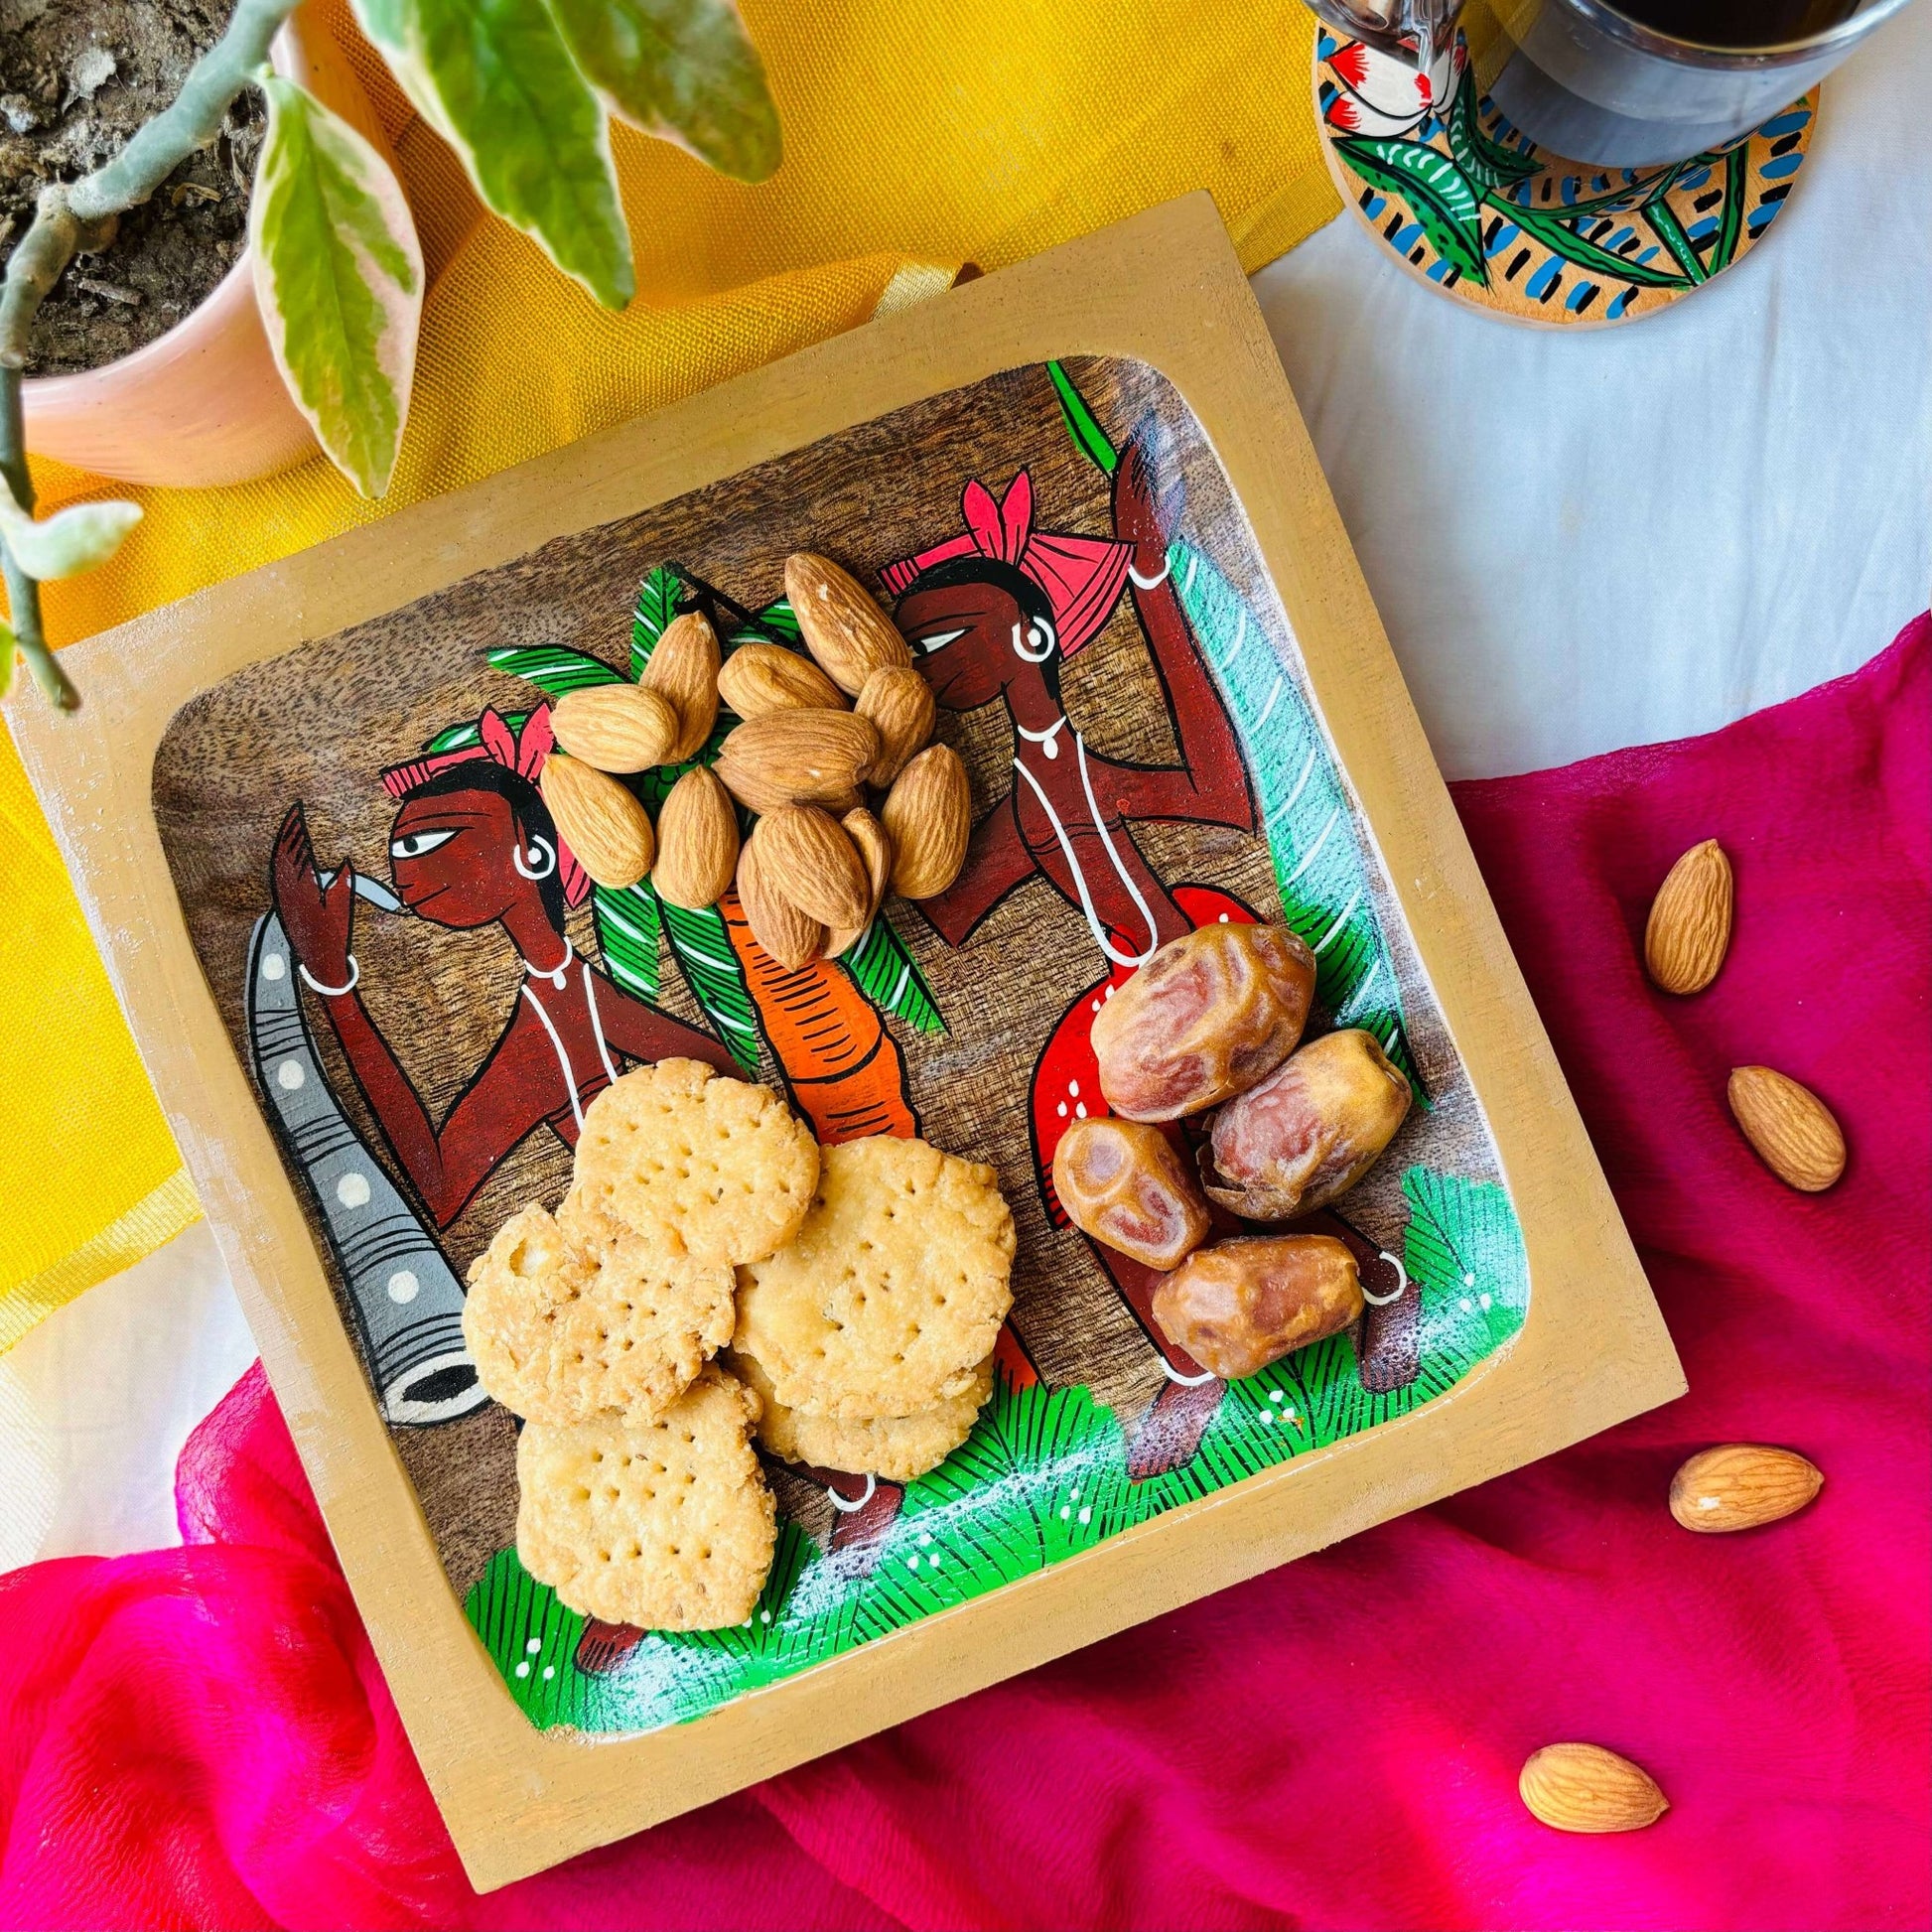 Biscuits, dates and almonds served on a pure mango wood square wood platter/trinket tray hand painted with two tribal men wearing blue and orange clothes and a coconut tree motif is displayed against a yellow and pink background